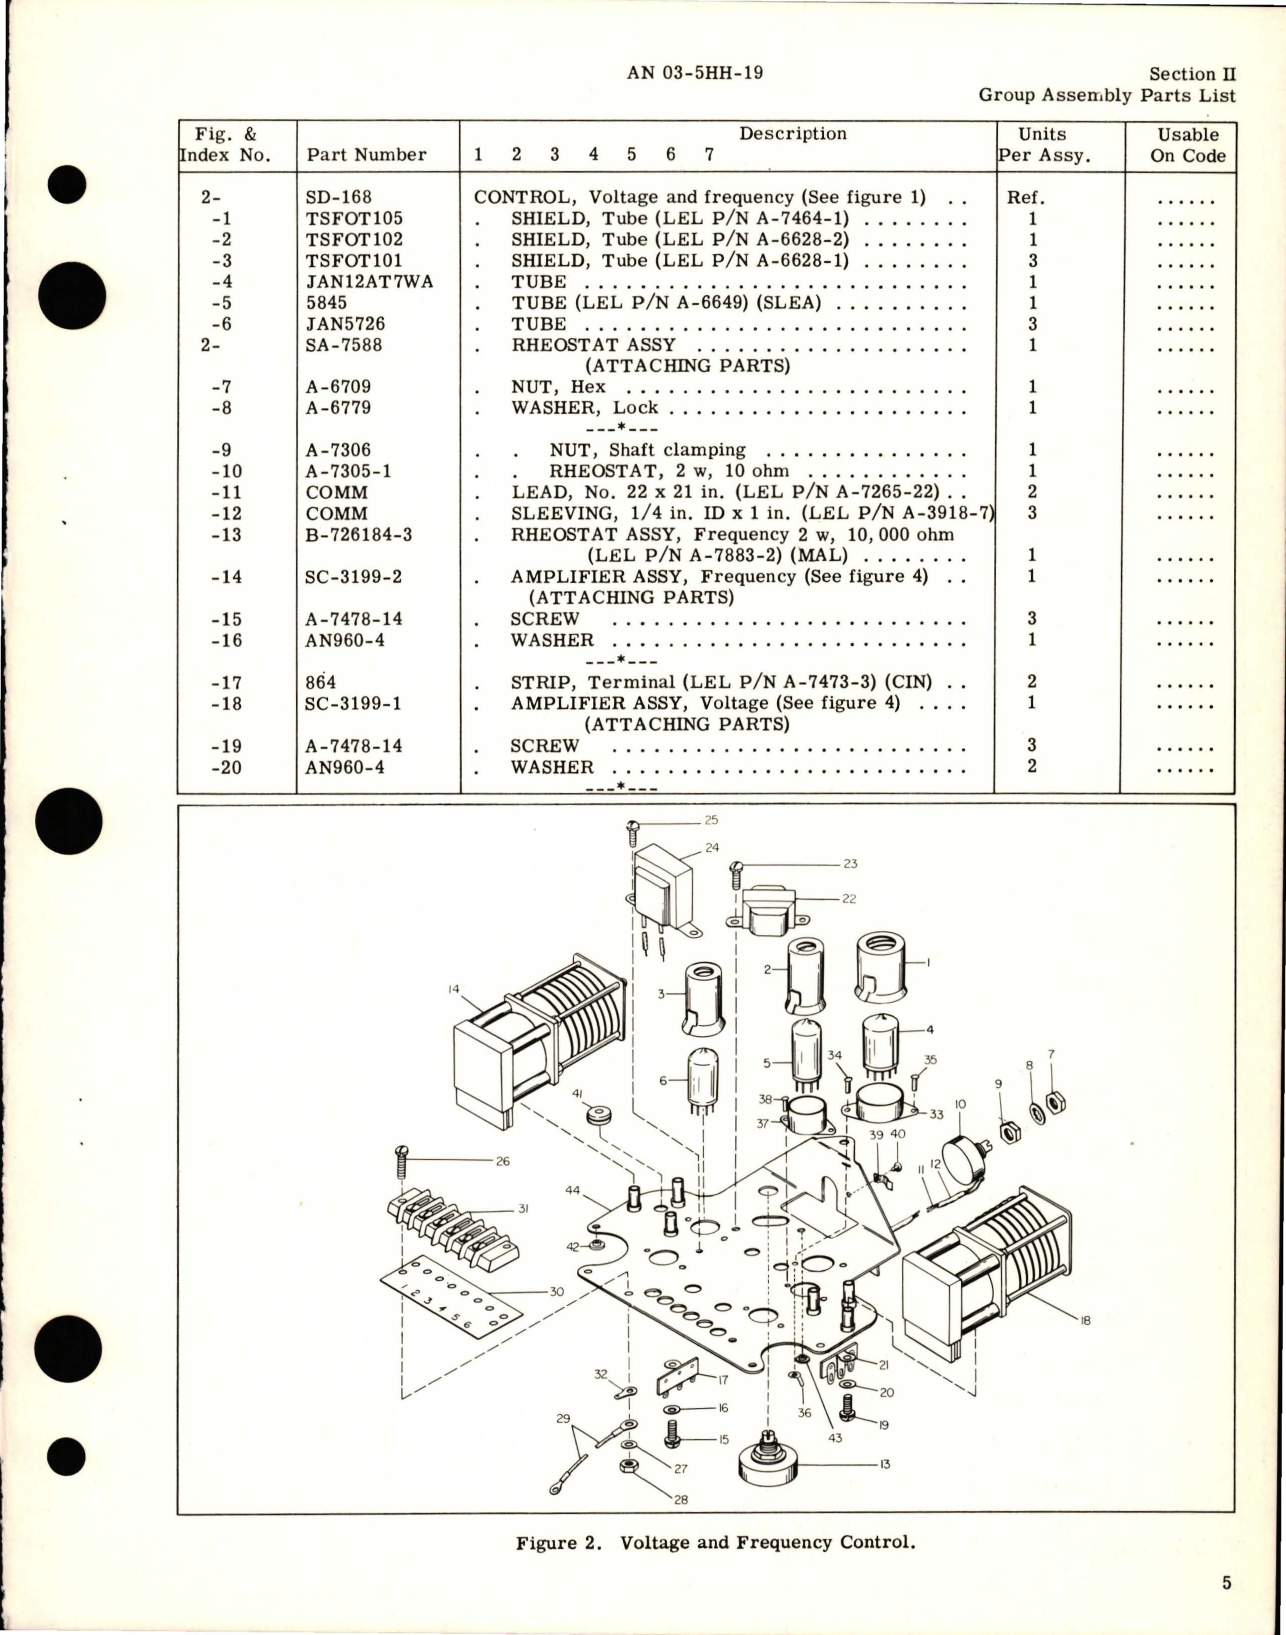 Sample page 9 from AirCorps Library document: Illustrated Parts Breakdown for Inverter - Parts SE-8-2 and SE-8-3